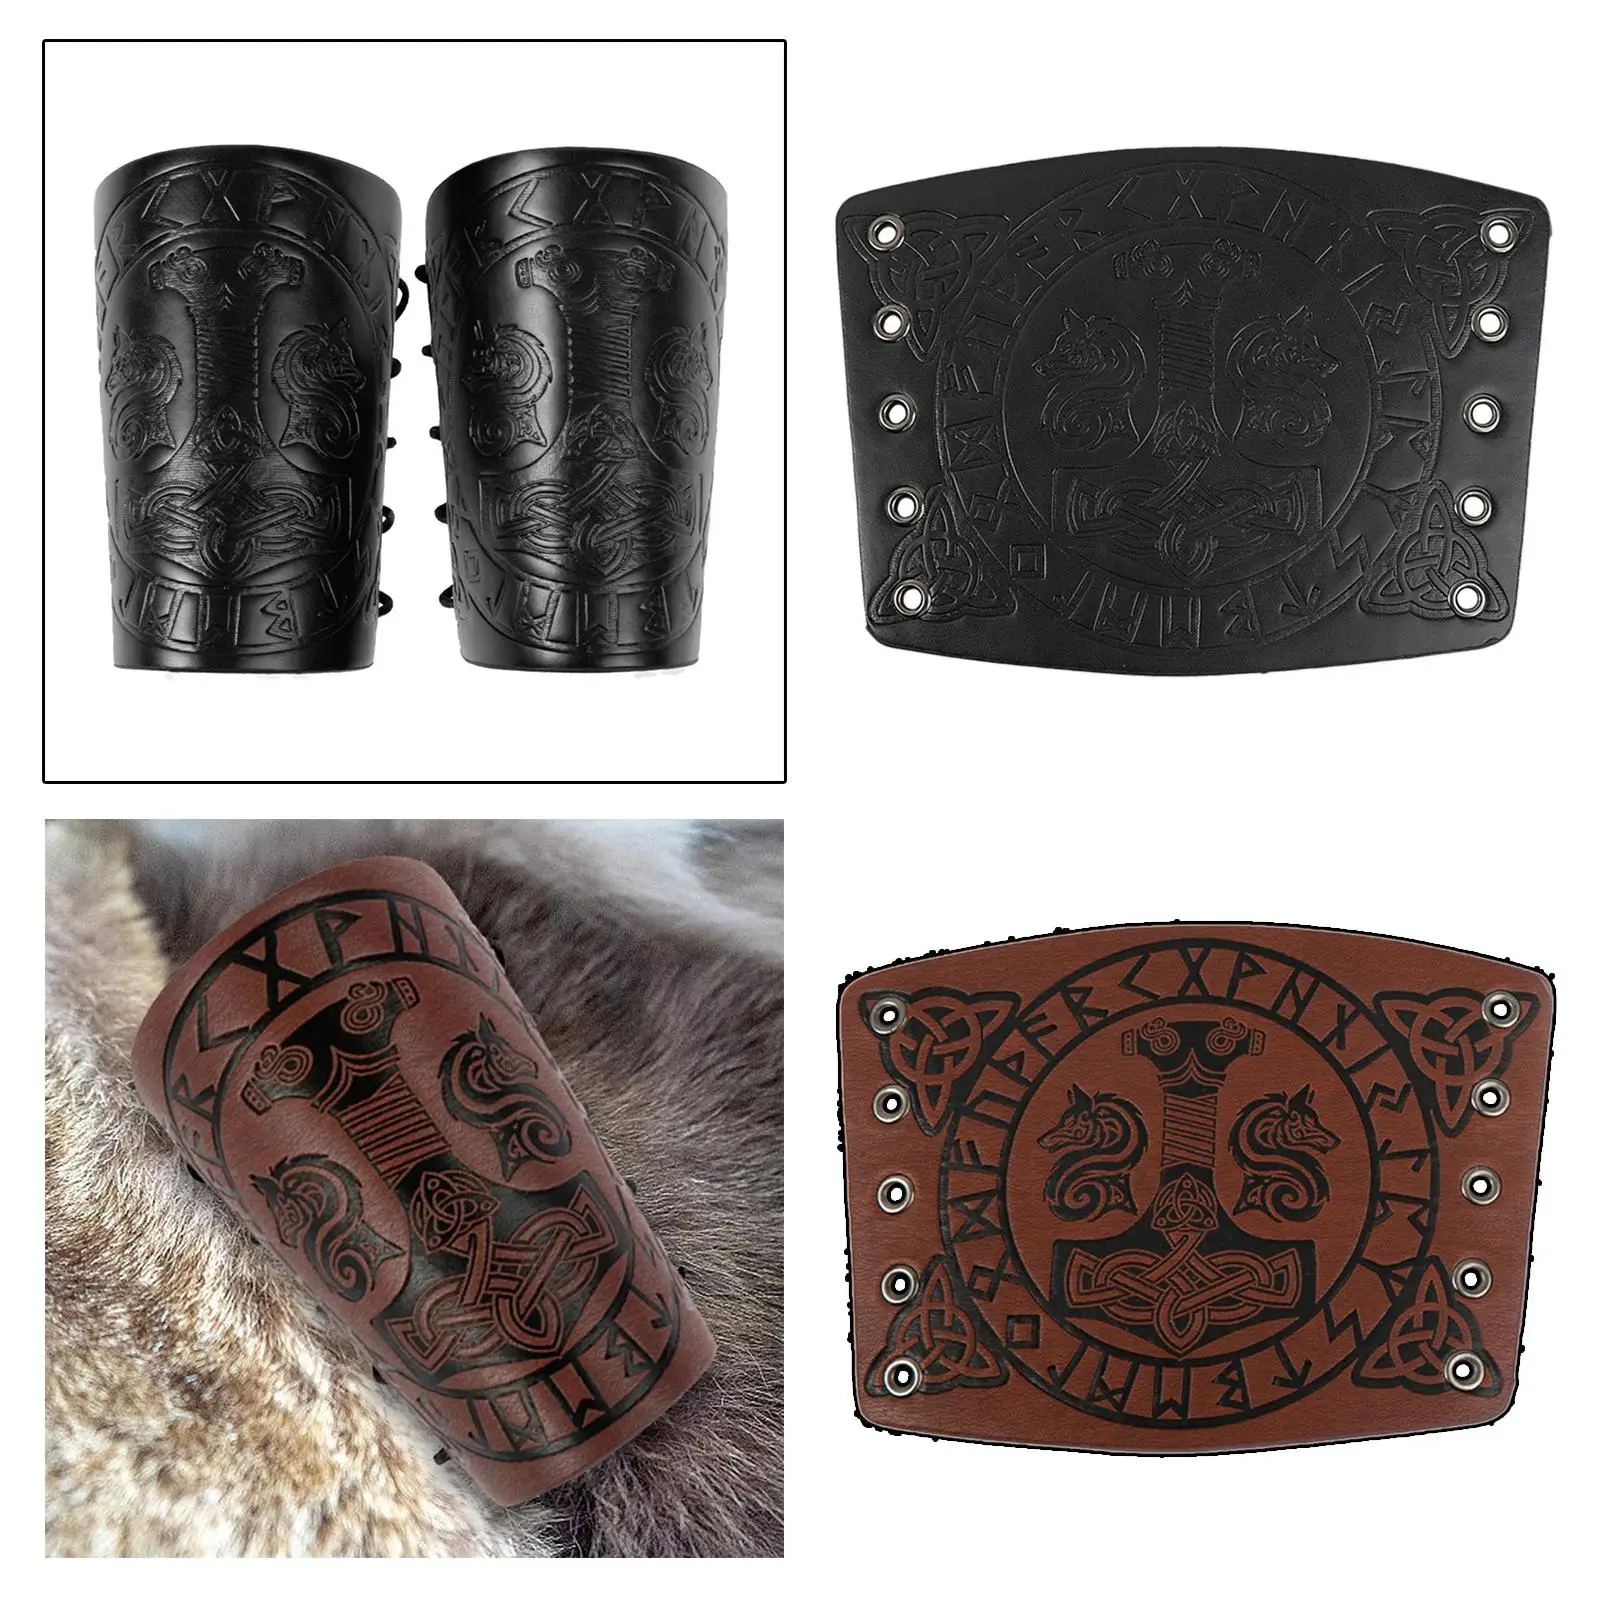 Arm Cuff Bracelet Quake Pattern Medieval Wristband Themed Style Arm Guard for Stage Show Cosplay Fancy Dress Role Playing Adults